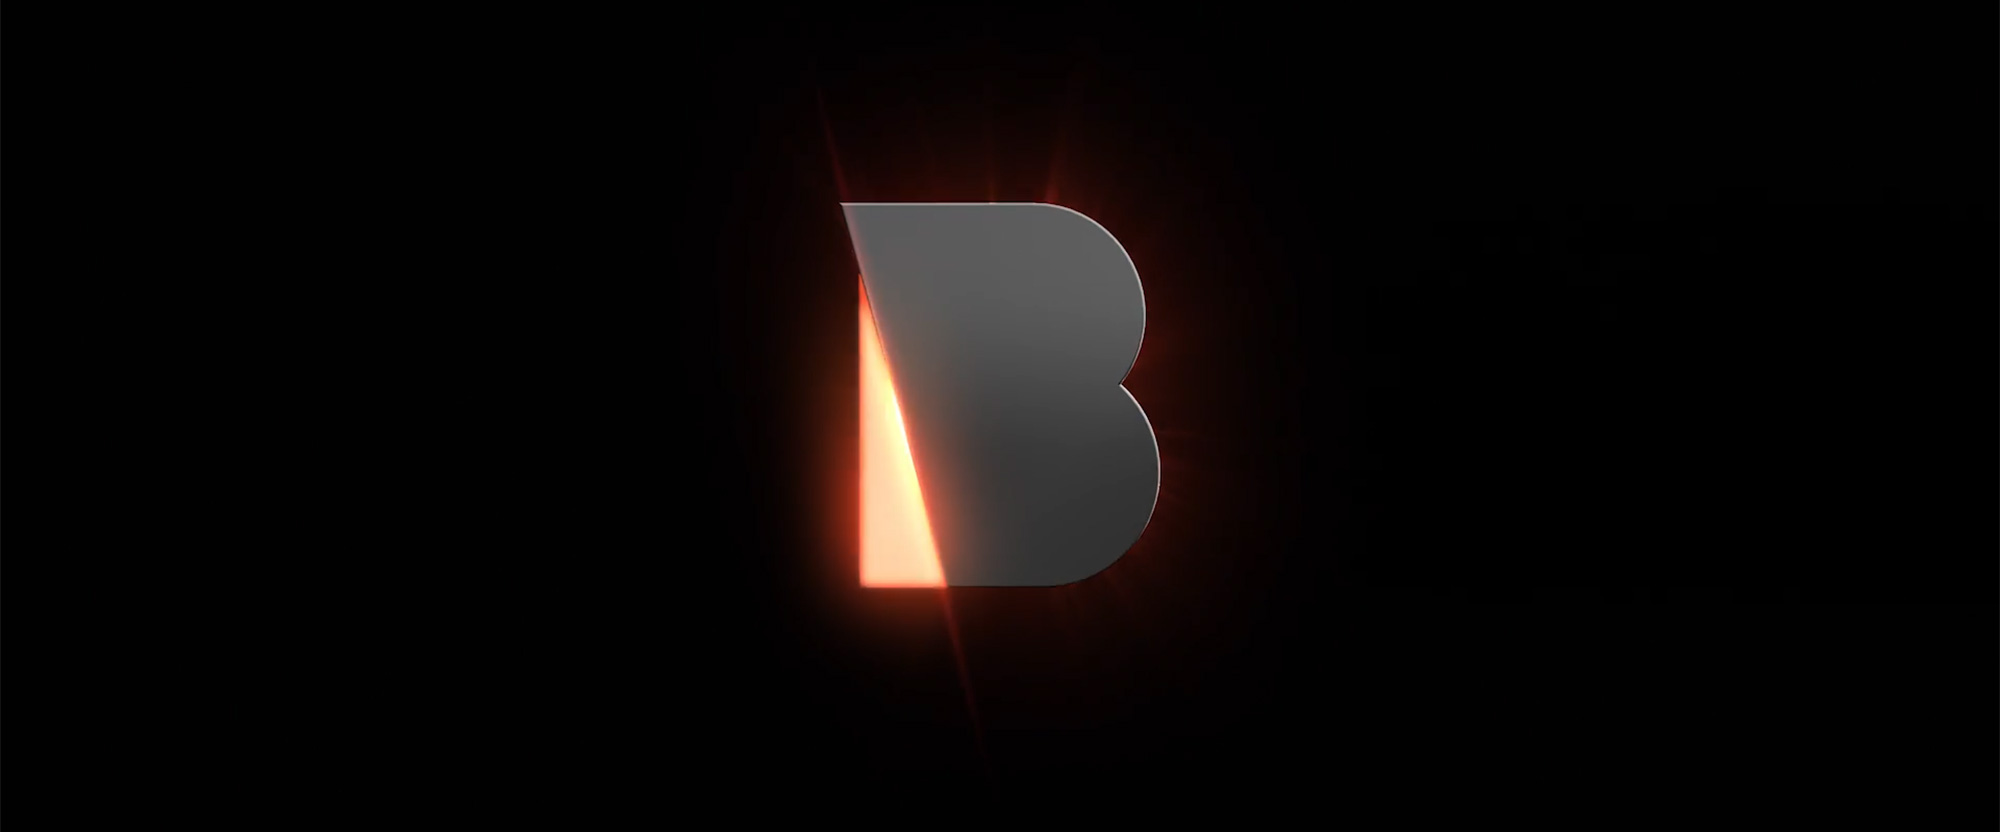 Follow-up: New Identity for BioWare by Tolleson and In-house